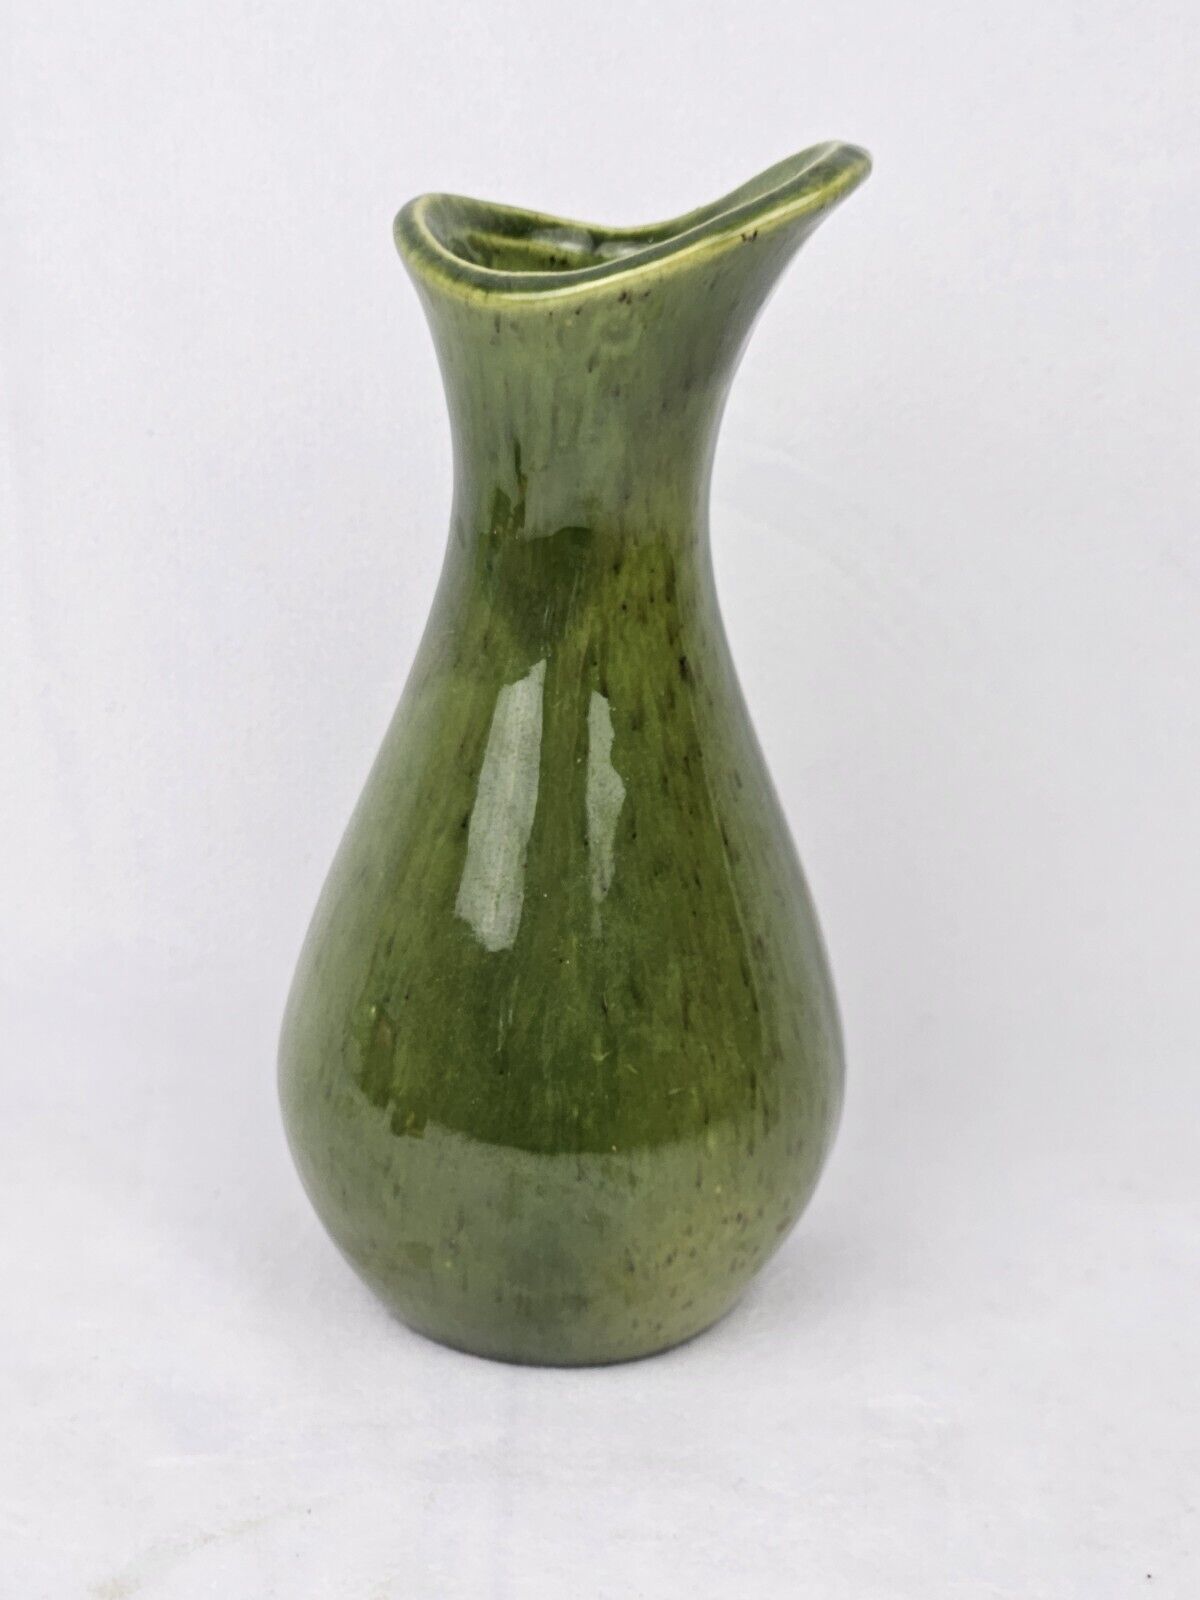 Ceramic Bud Vase Green 7 Inch Small Flower Vase Abstract Free Form